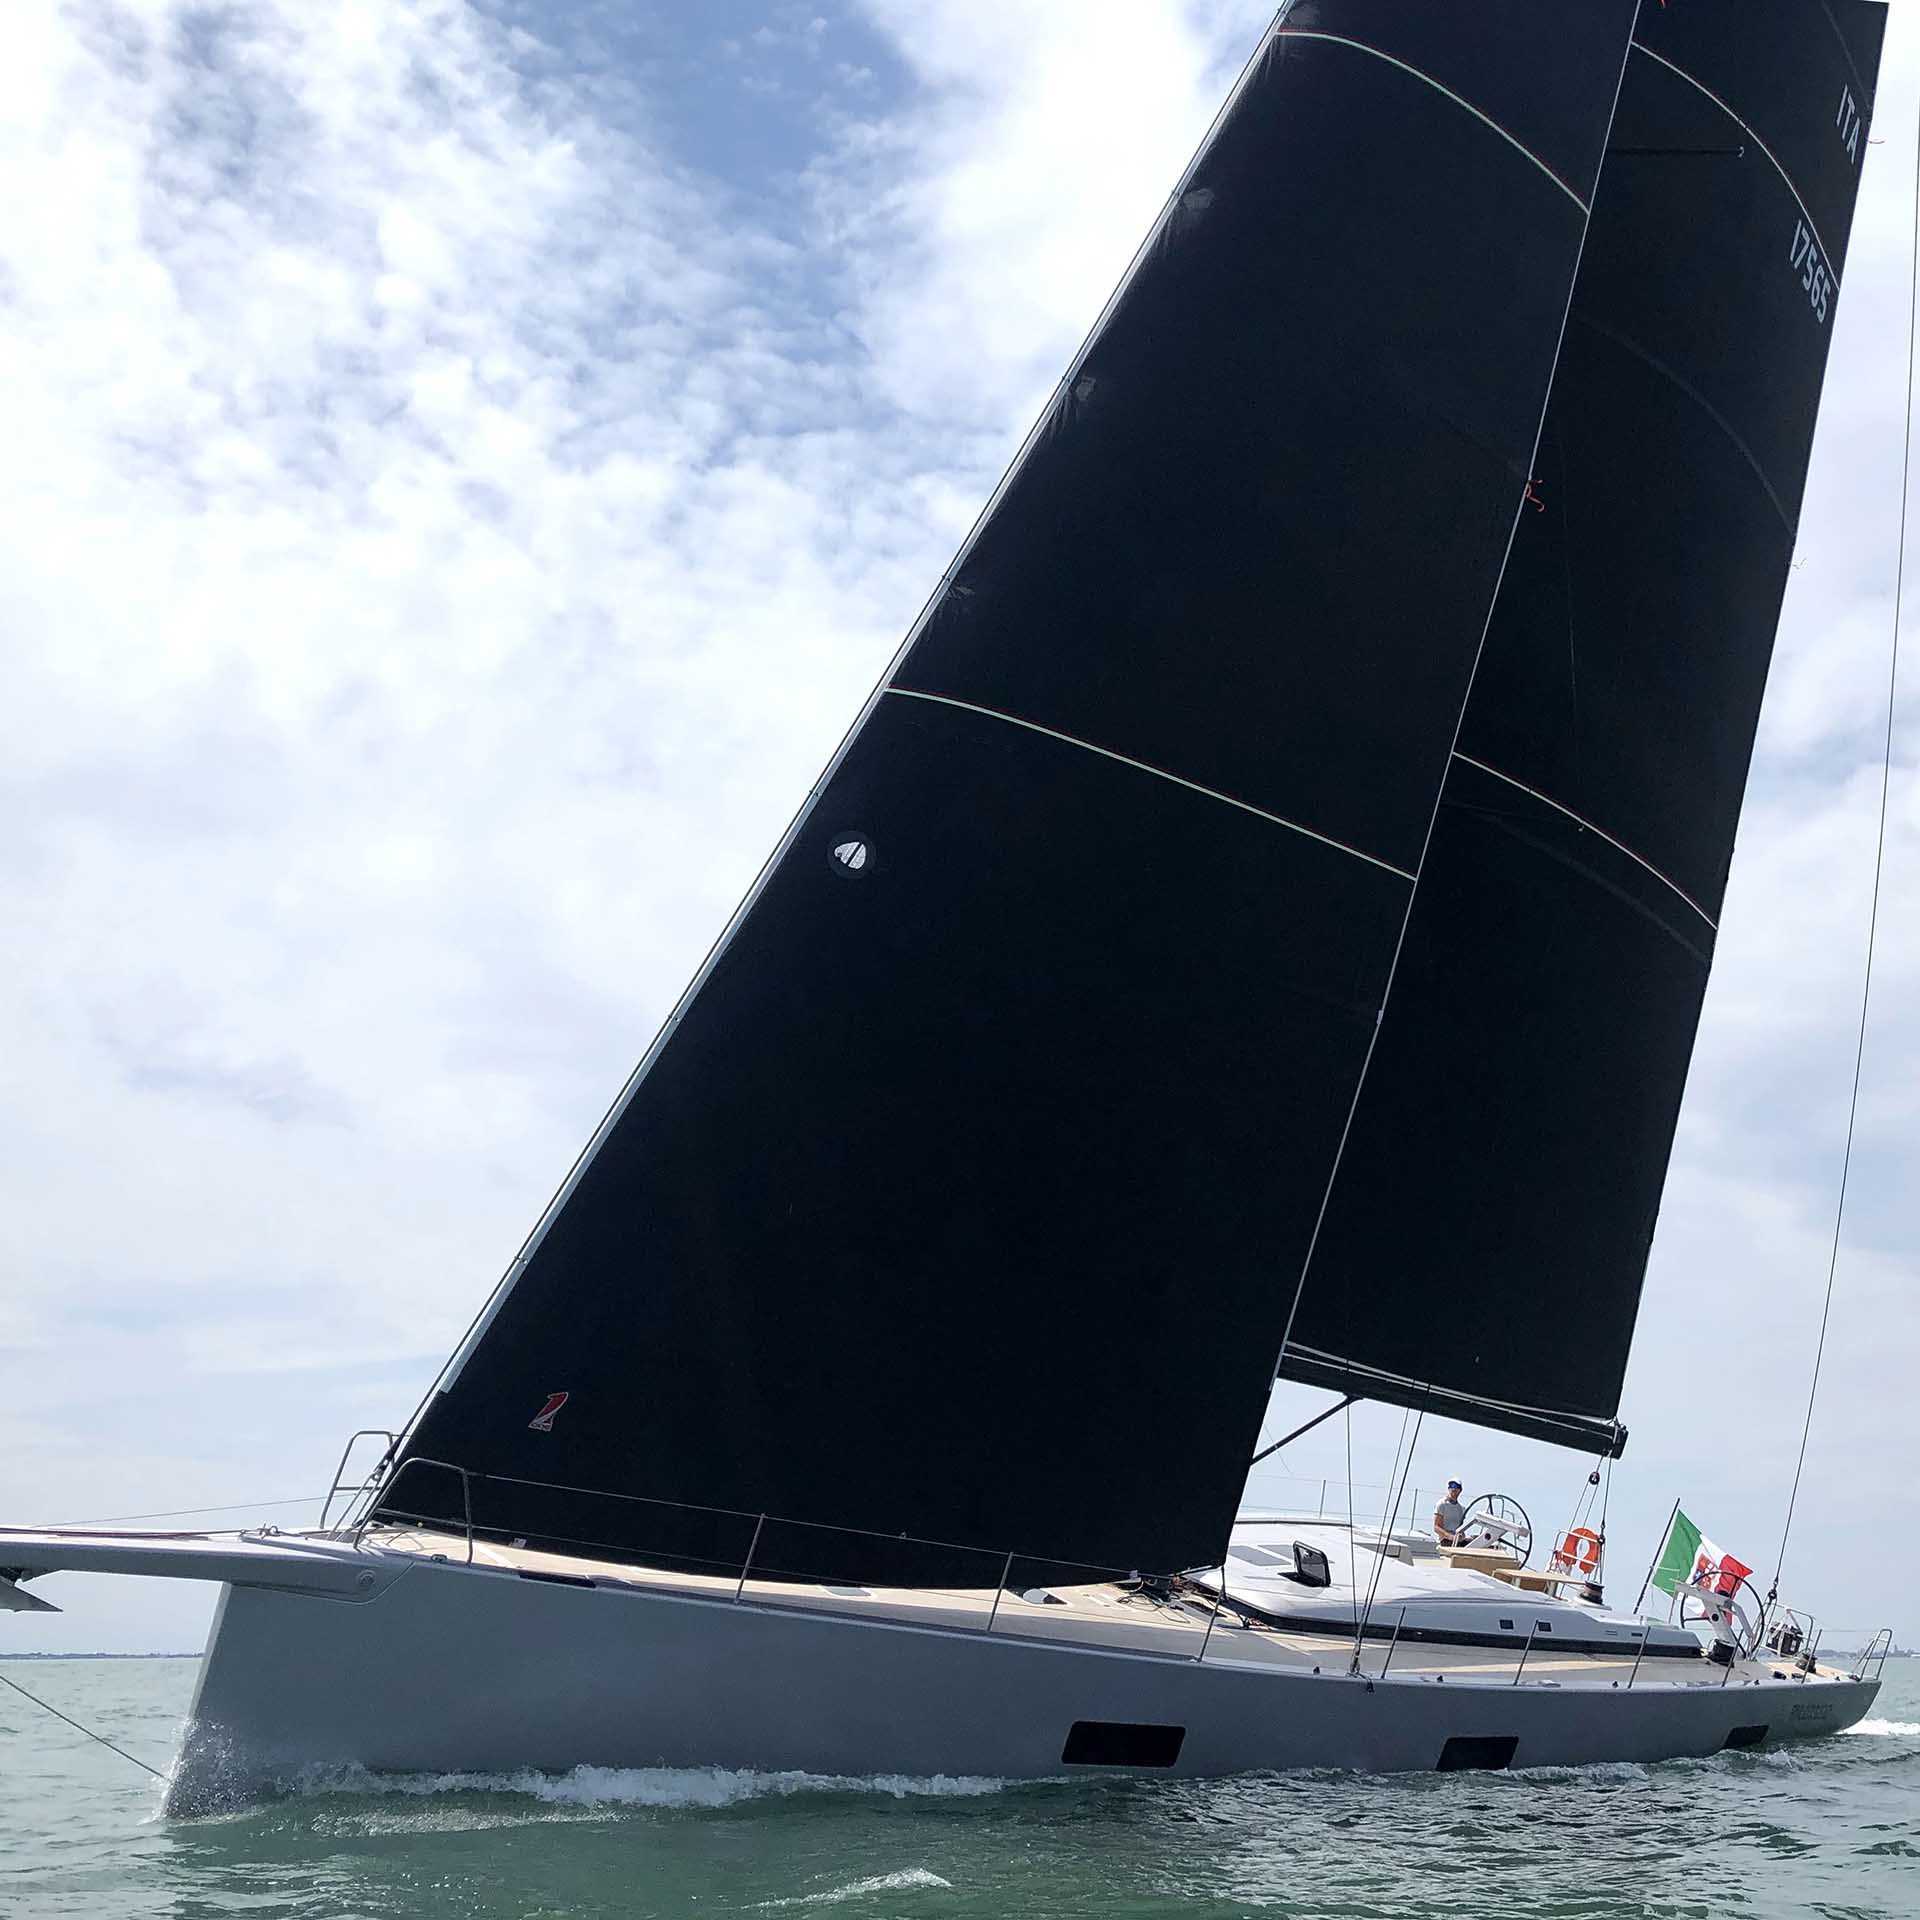 Scuderia 65 High Performance Sailing Yacht by Harry Miesbauer.